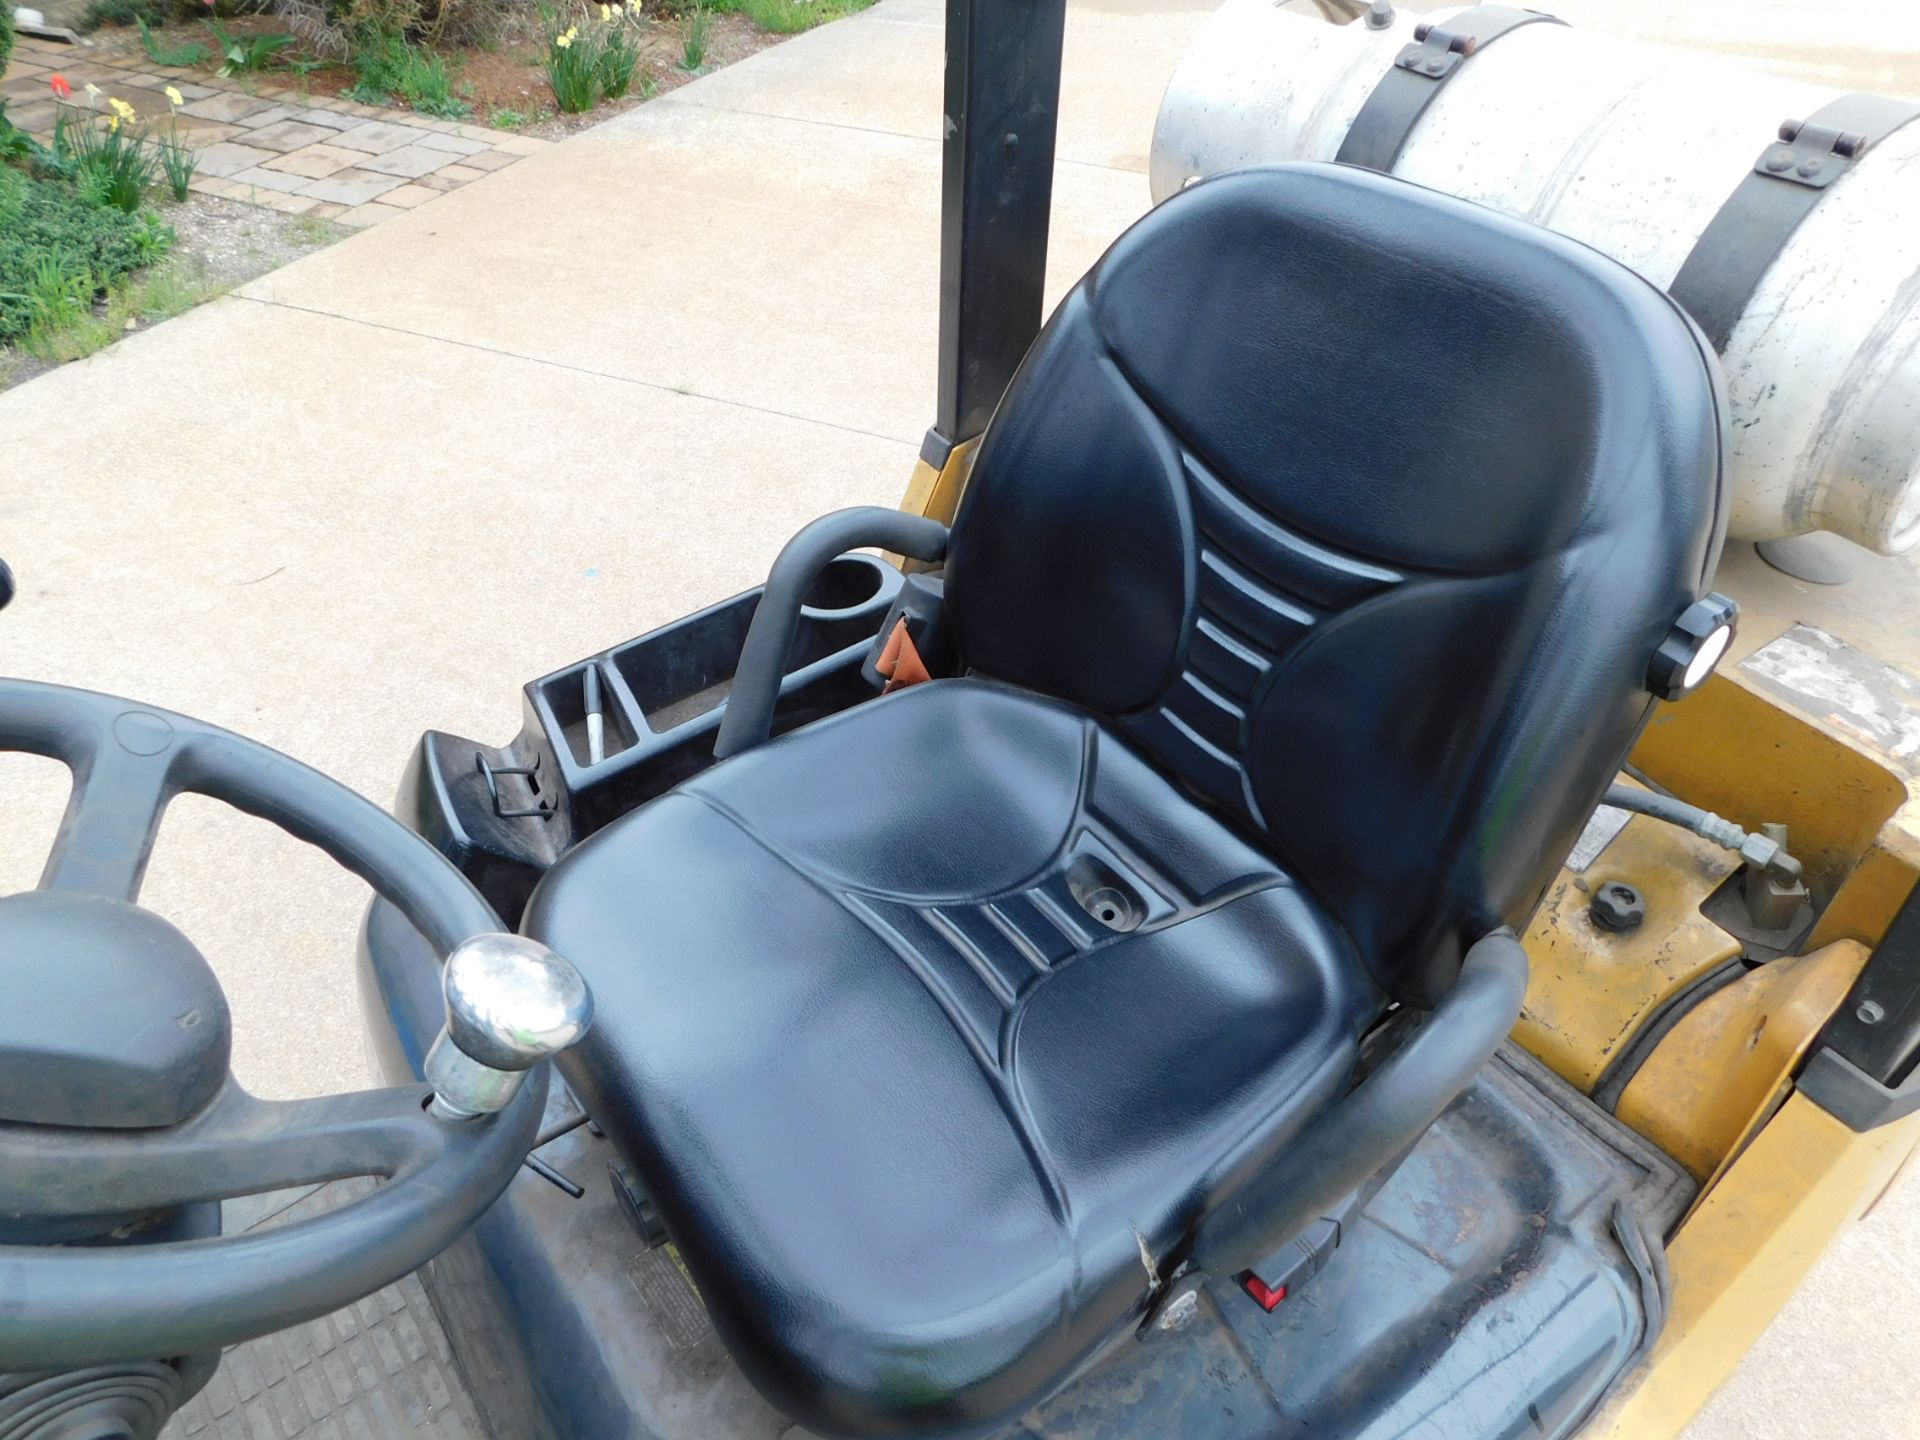 Caterpillar Model 2C6000 Forklift, SN AT83F40876, 4,500 lb cap., LP, Non-Marking Hard Tires, 3-Stage - Image 12 of 21